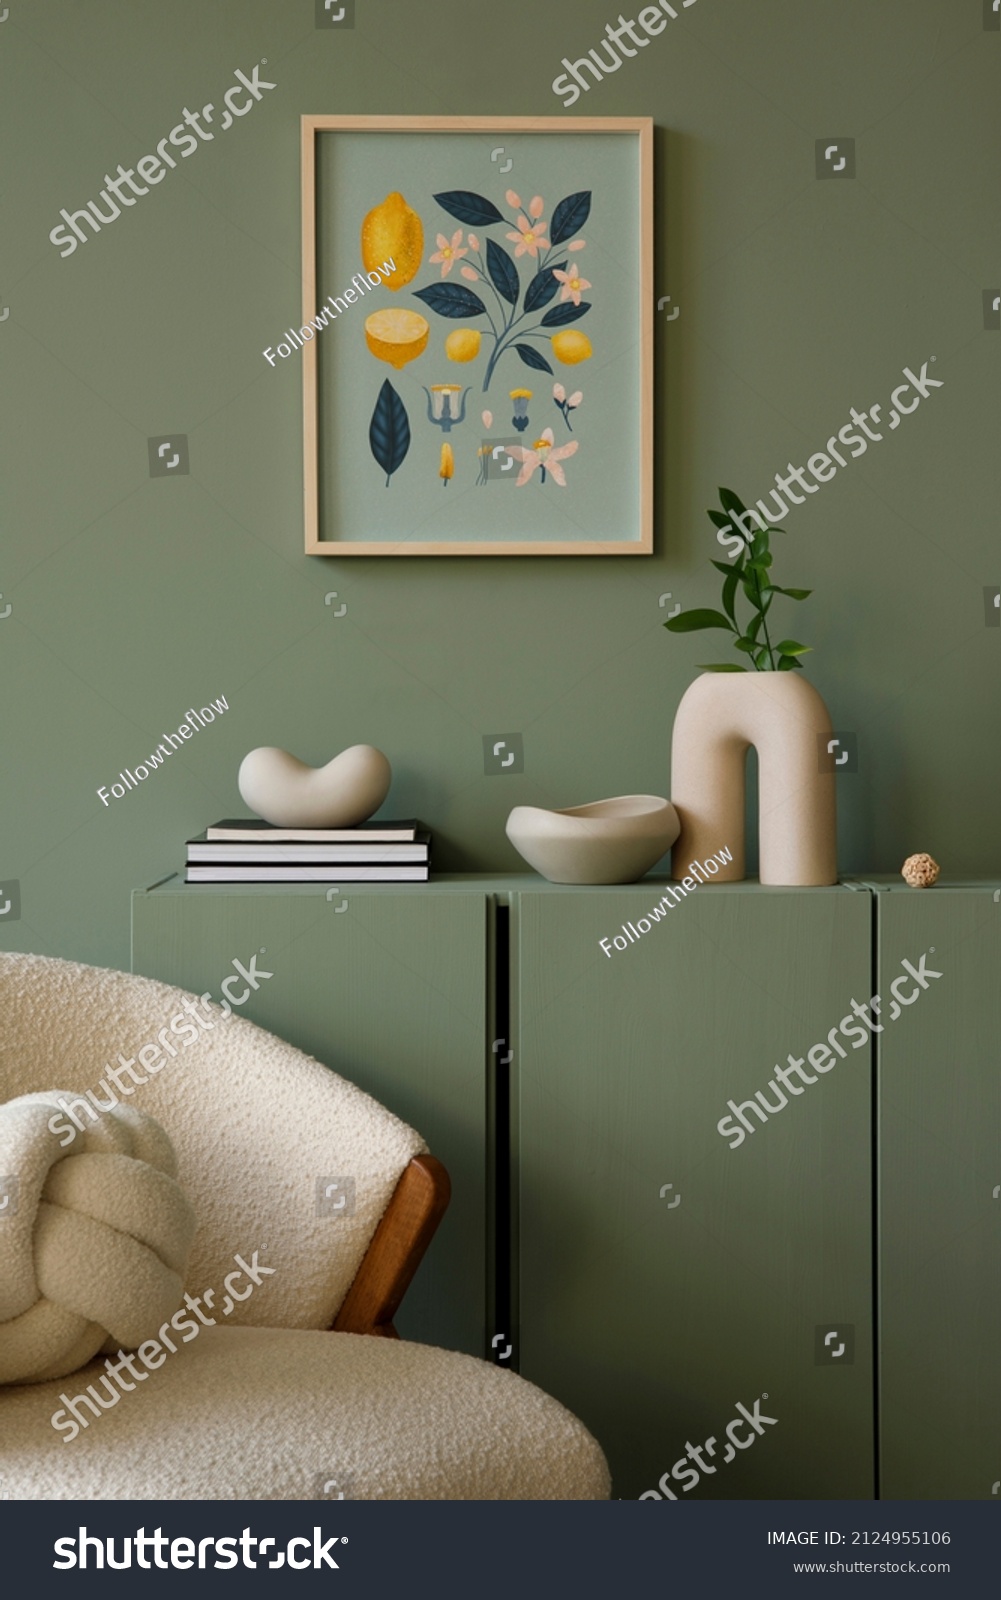 Elegant living room interior design with mockup poster frame, modern frotte armchair, wooden commode and stylish accessories. Eucalyptus wall. Template. Copy space. #2124955106